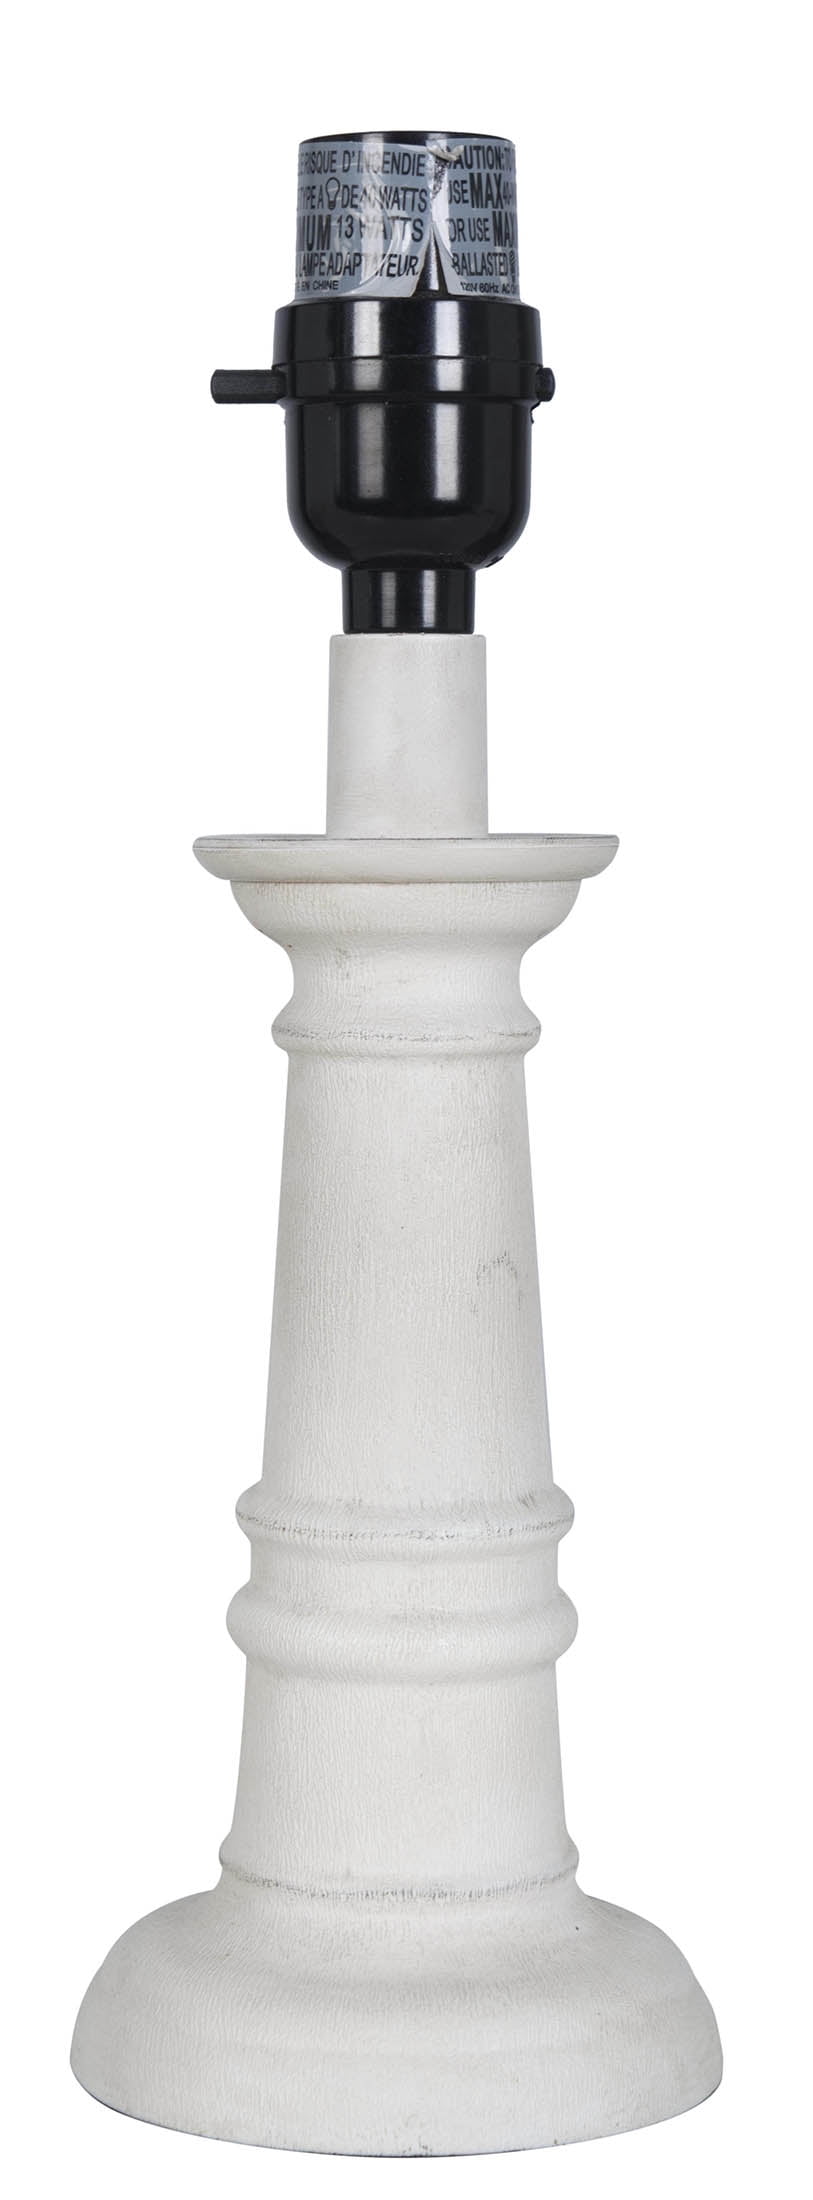 Mainstays Pillar Faux Wood Accent Lamp Base, White